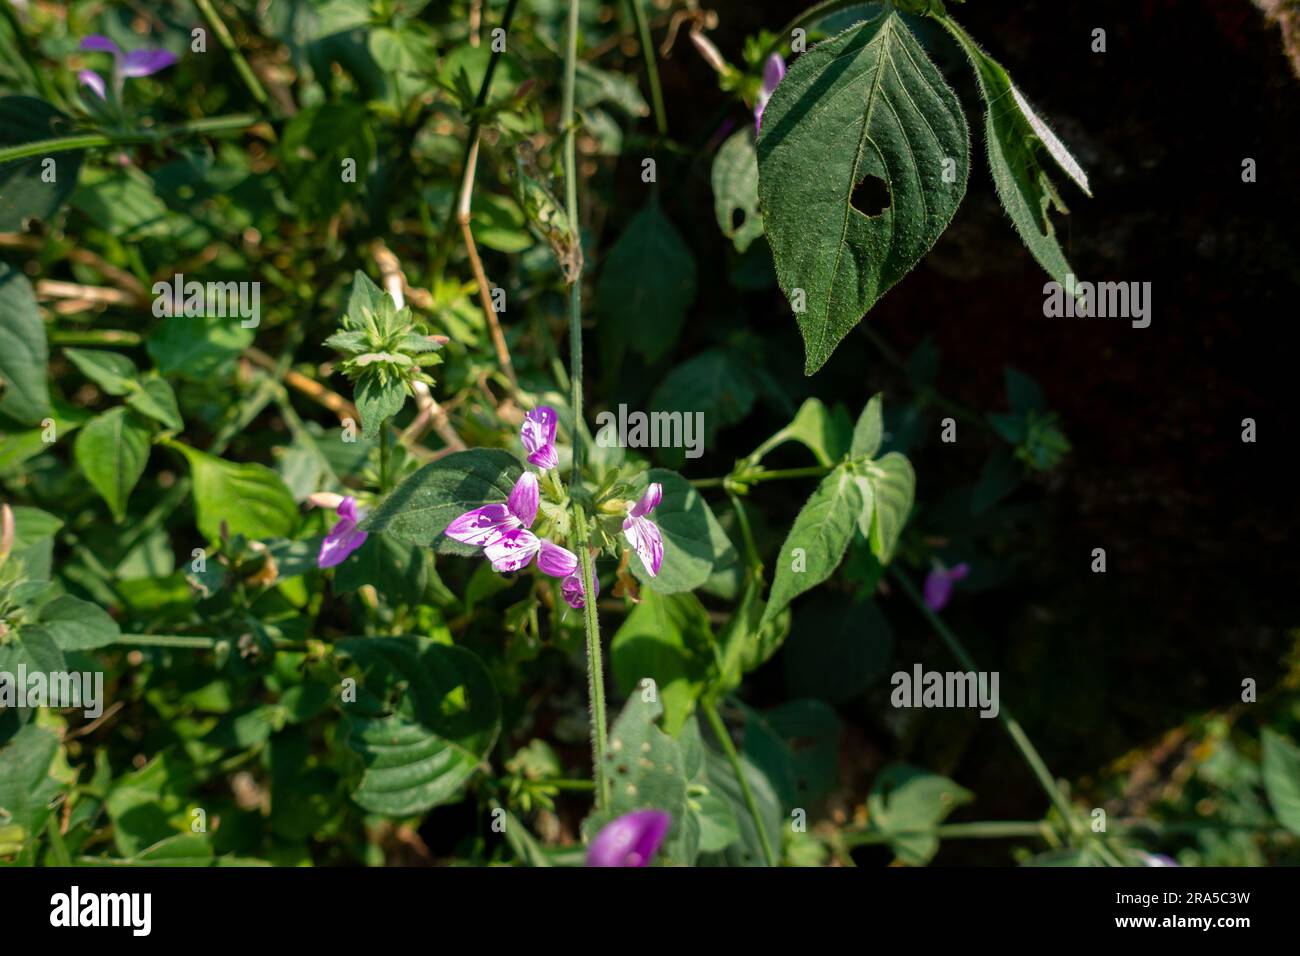 Dicliptera brachiata (Branched foldwing) wild flowers and leaves. India Stock Photo